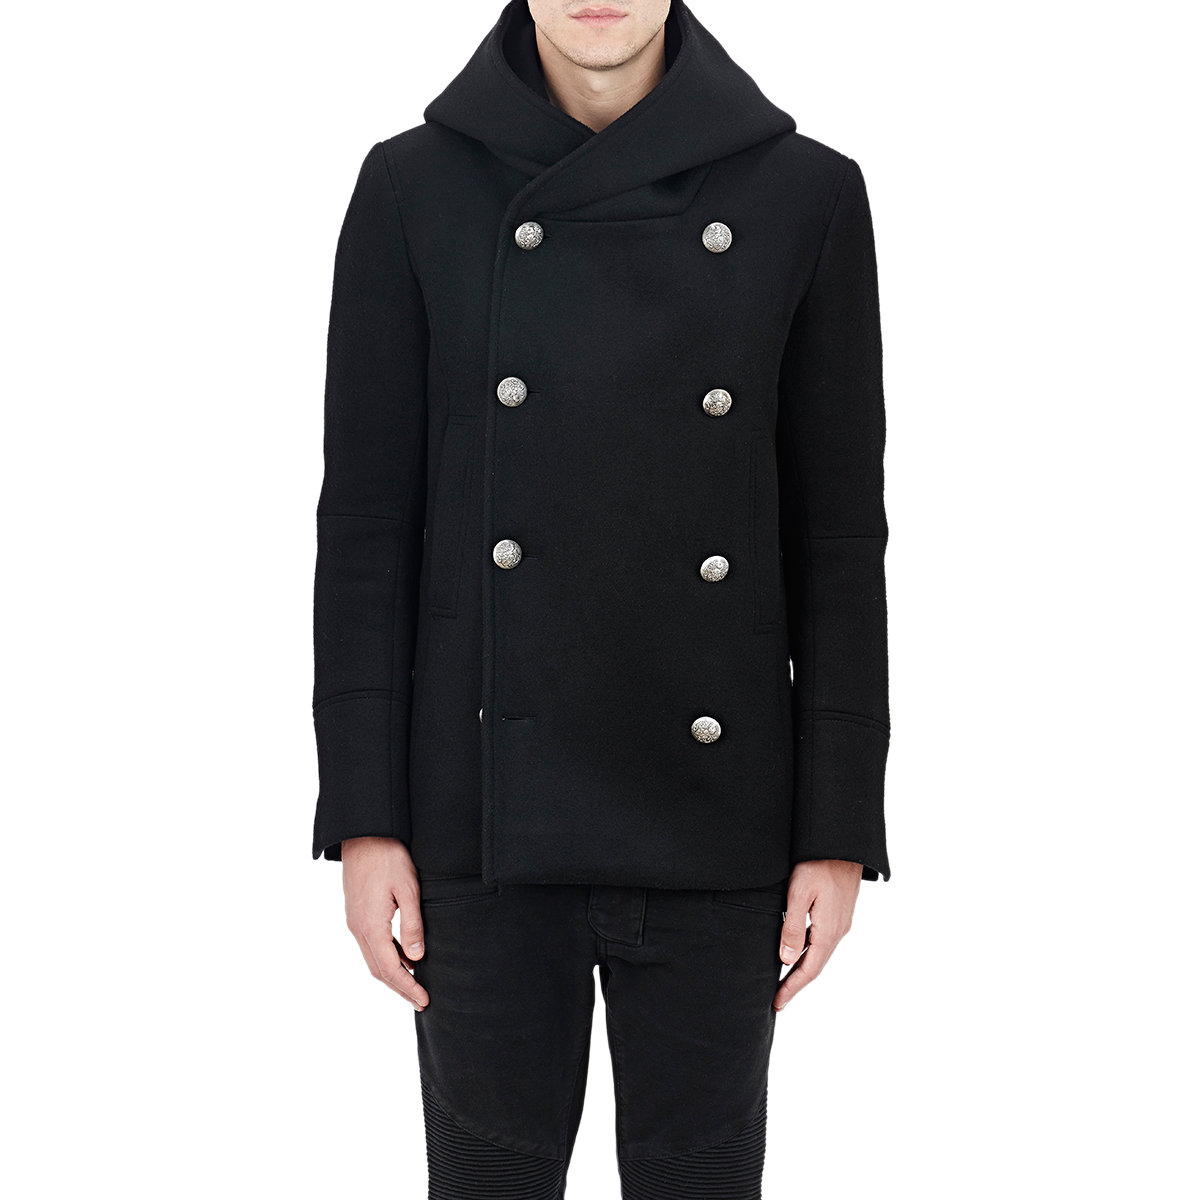 Lyst - Balmain Hooded Double-breasted Peacoat in Black for Men